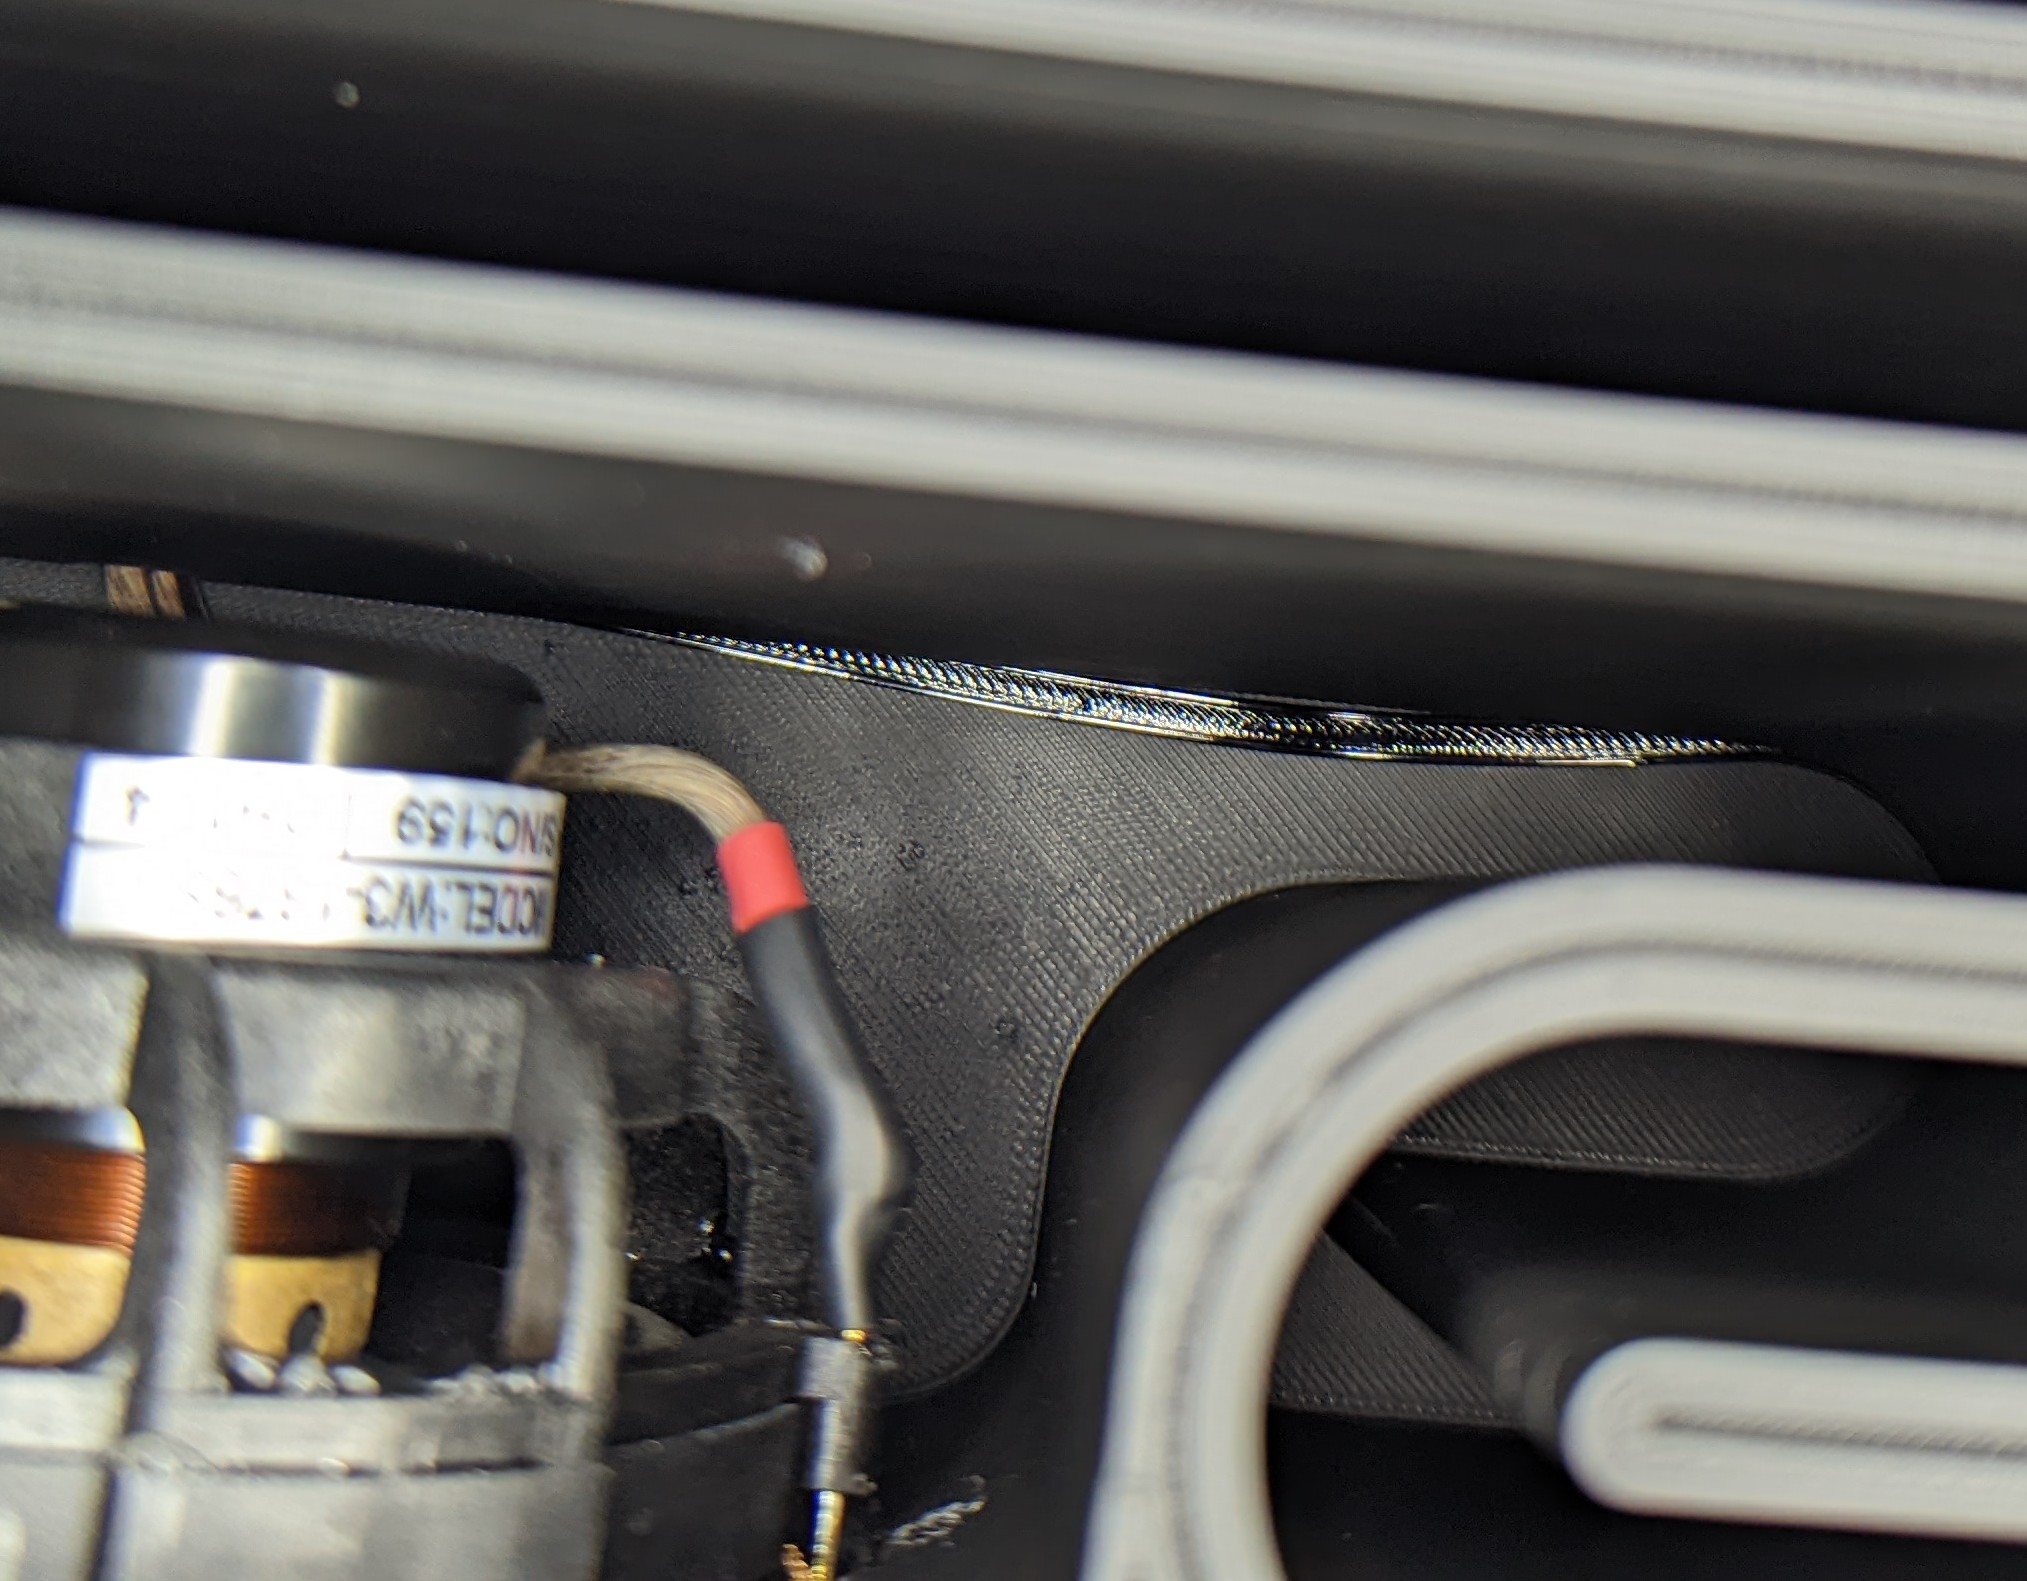 Picture showing close up of subwoofer panel and gasket attached to the subwoofer body. The torque from one of the screws has distorted the gasket material every so slightly.